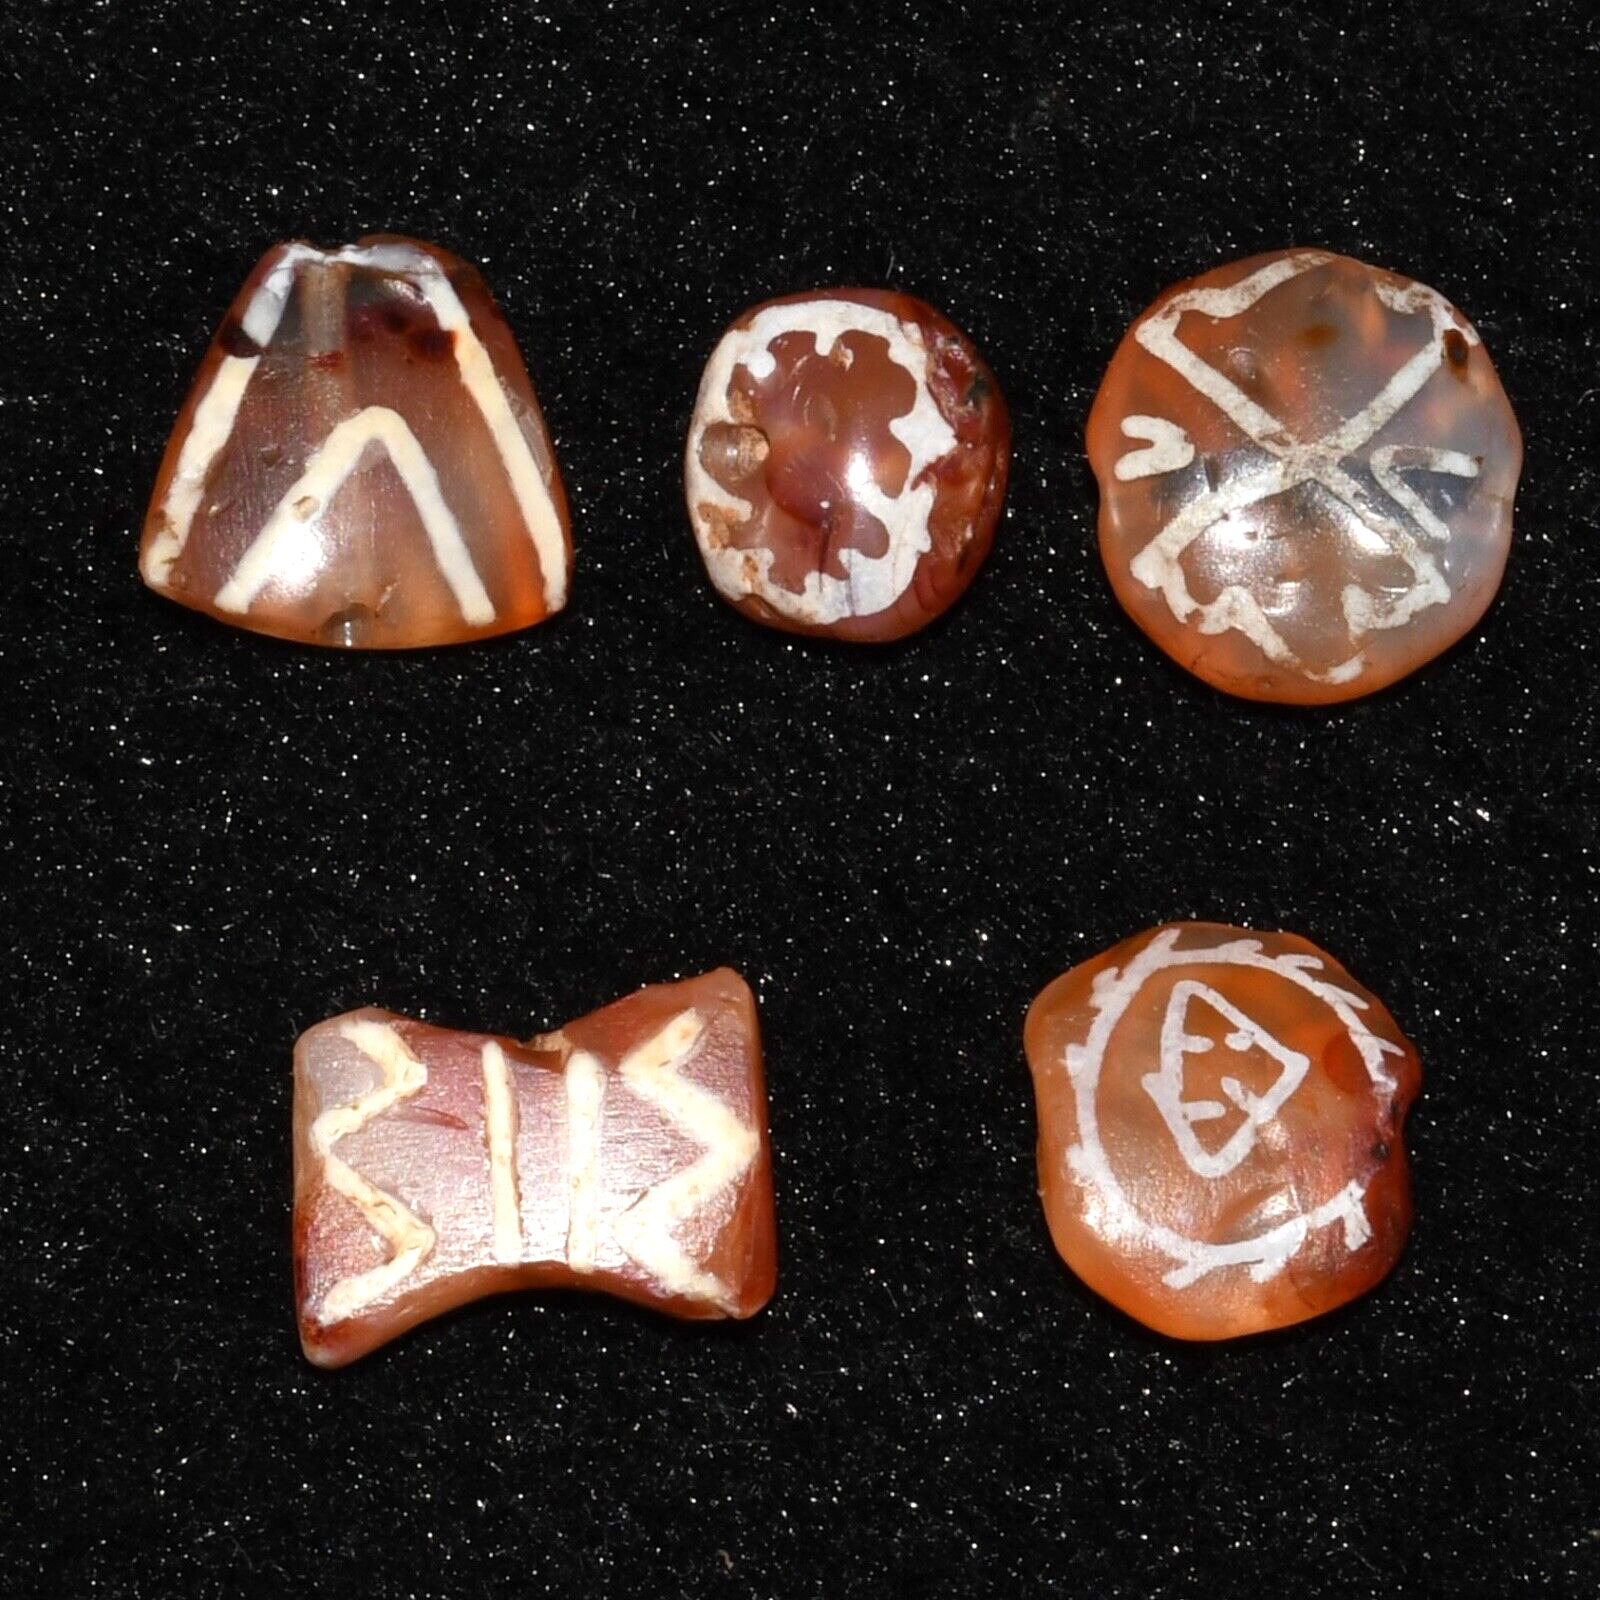 5 Genuine Ancient Pyu Culture Etched Carnelian Bead in Good Condition